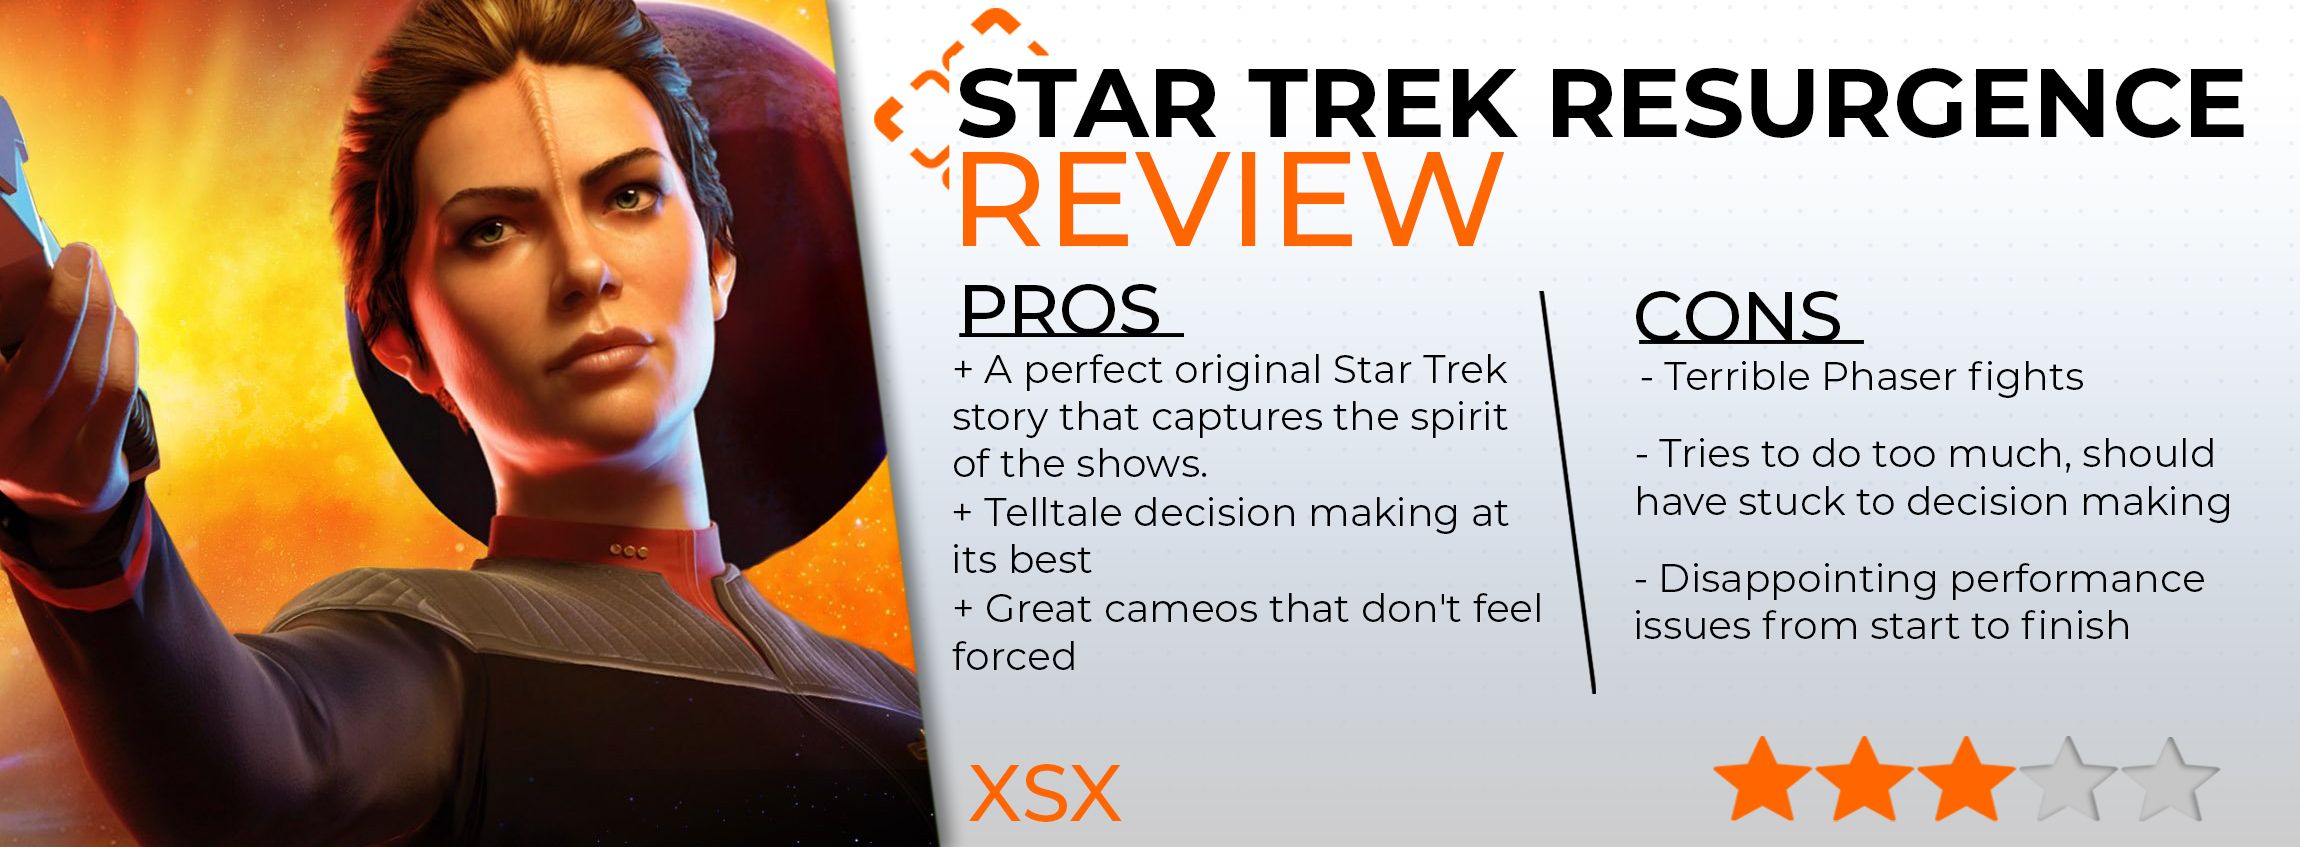 A Star Trek Resurgence review card, awarding the game 3 out of 5 stars. The listed pros: "A perfect original Star Trek story that captures the spirit of the shows", "Telltale decision making at its best," and, "Great cameos that don't feel forced". The listed cons are: "Terrible Phaser fights", "Tries to do too much, should have stuck to decision making," and "Disappointing performance issues from start to finish". 